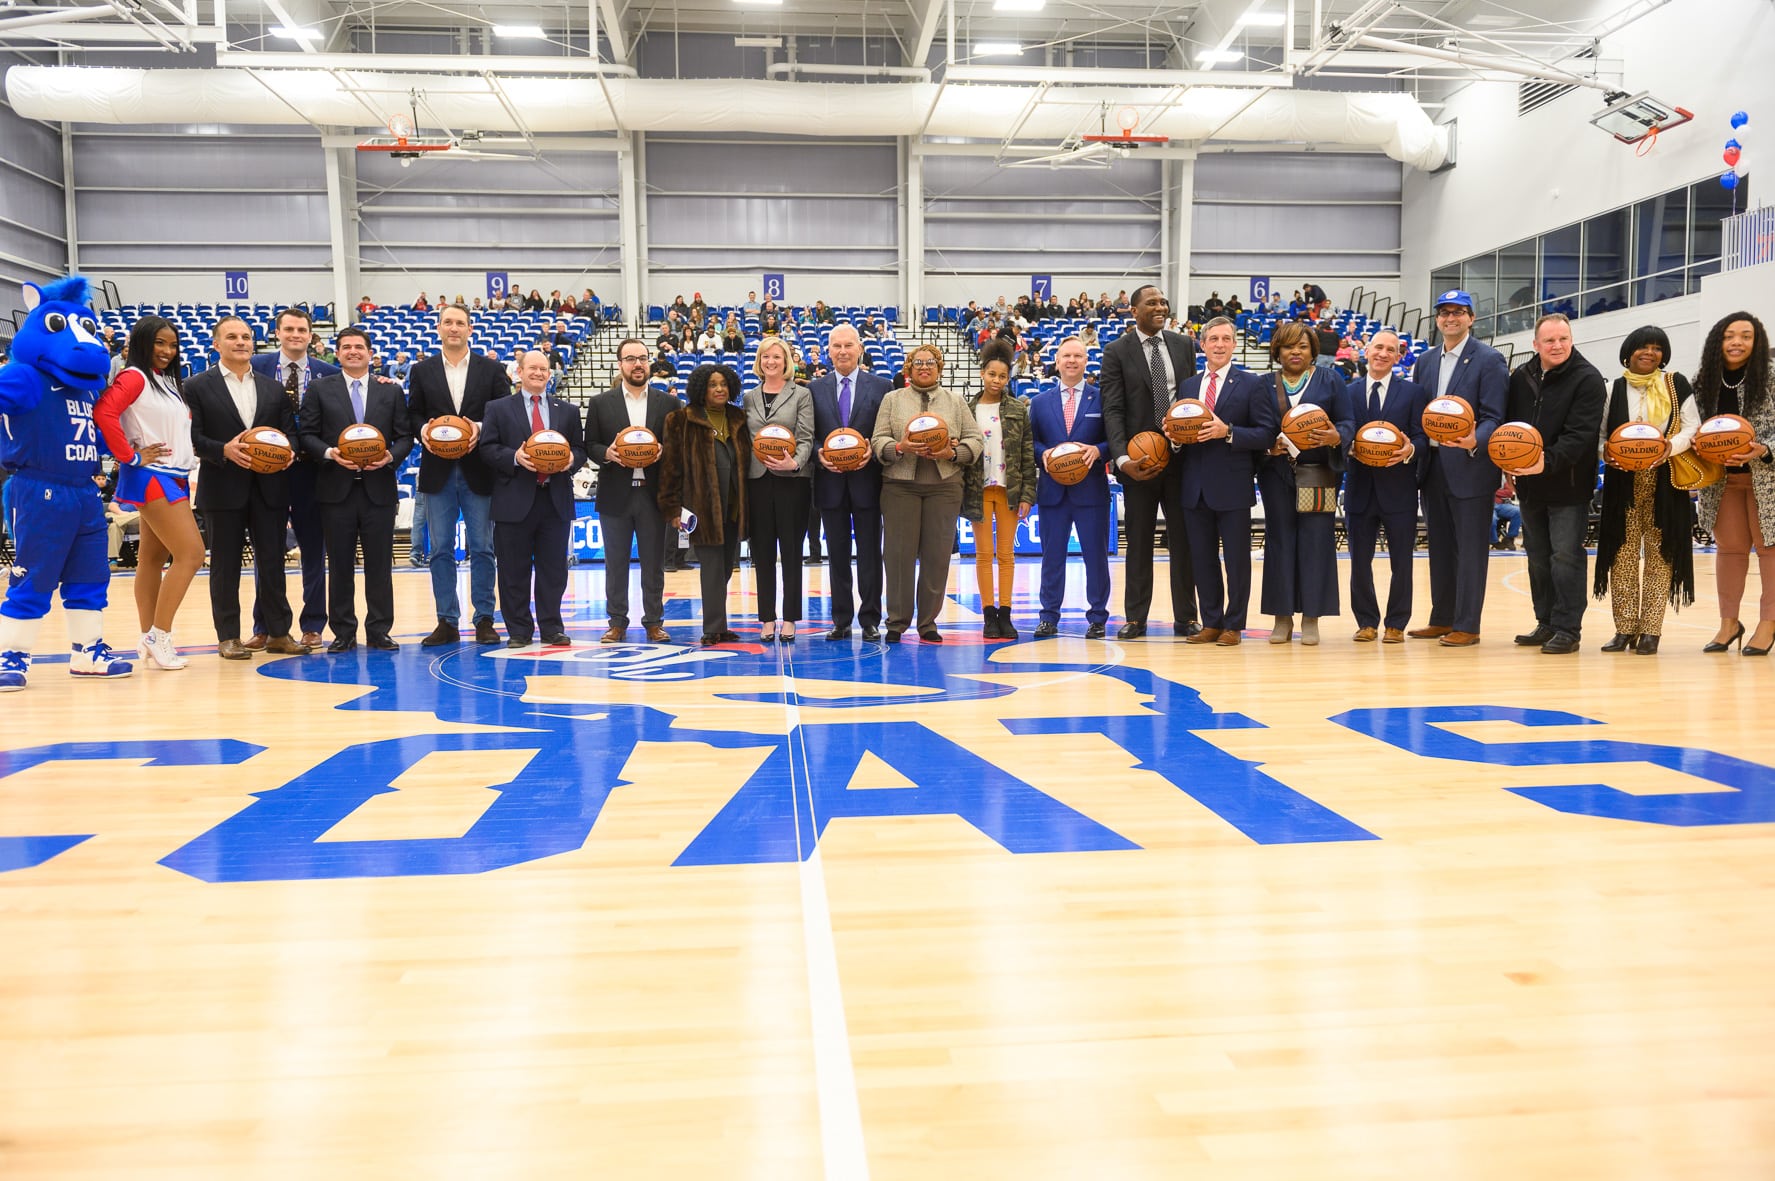 76ers Fieldhouse Featured on Delaware Online: Wilmington Takes Pride in 76ers Fieldhouse on Opening Night